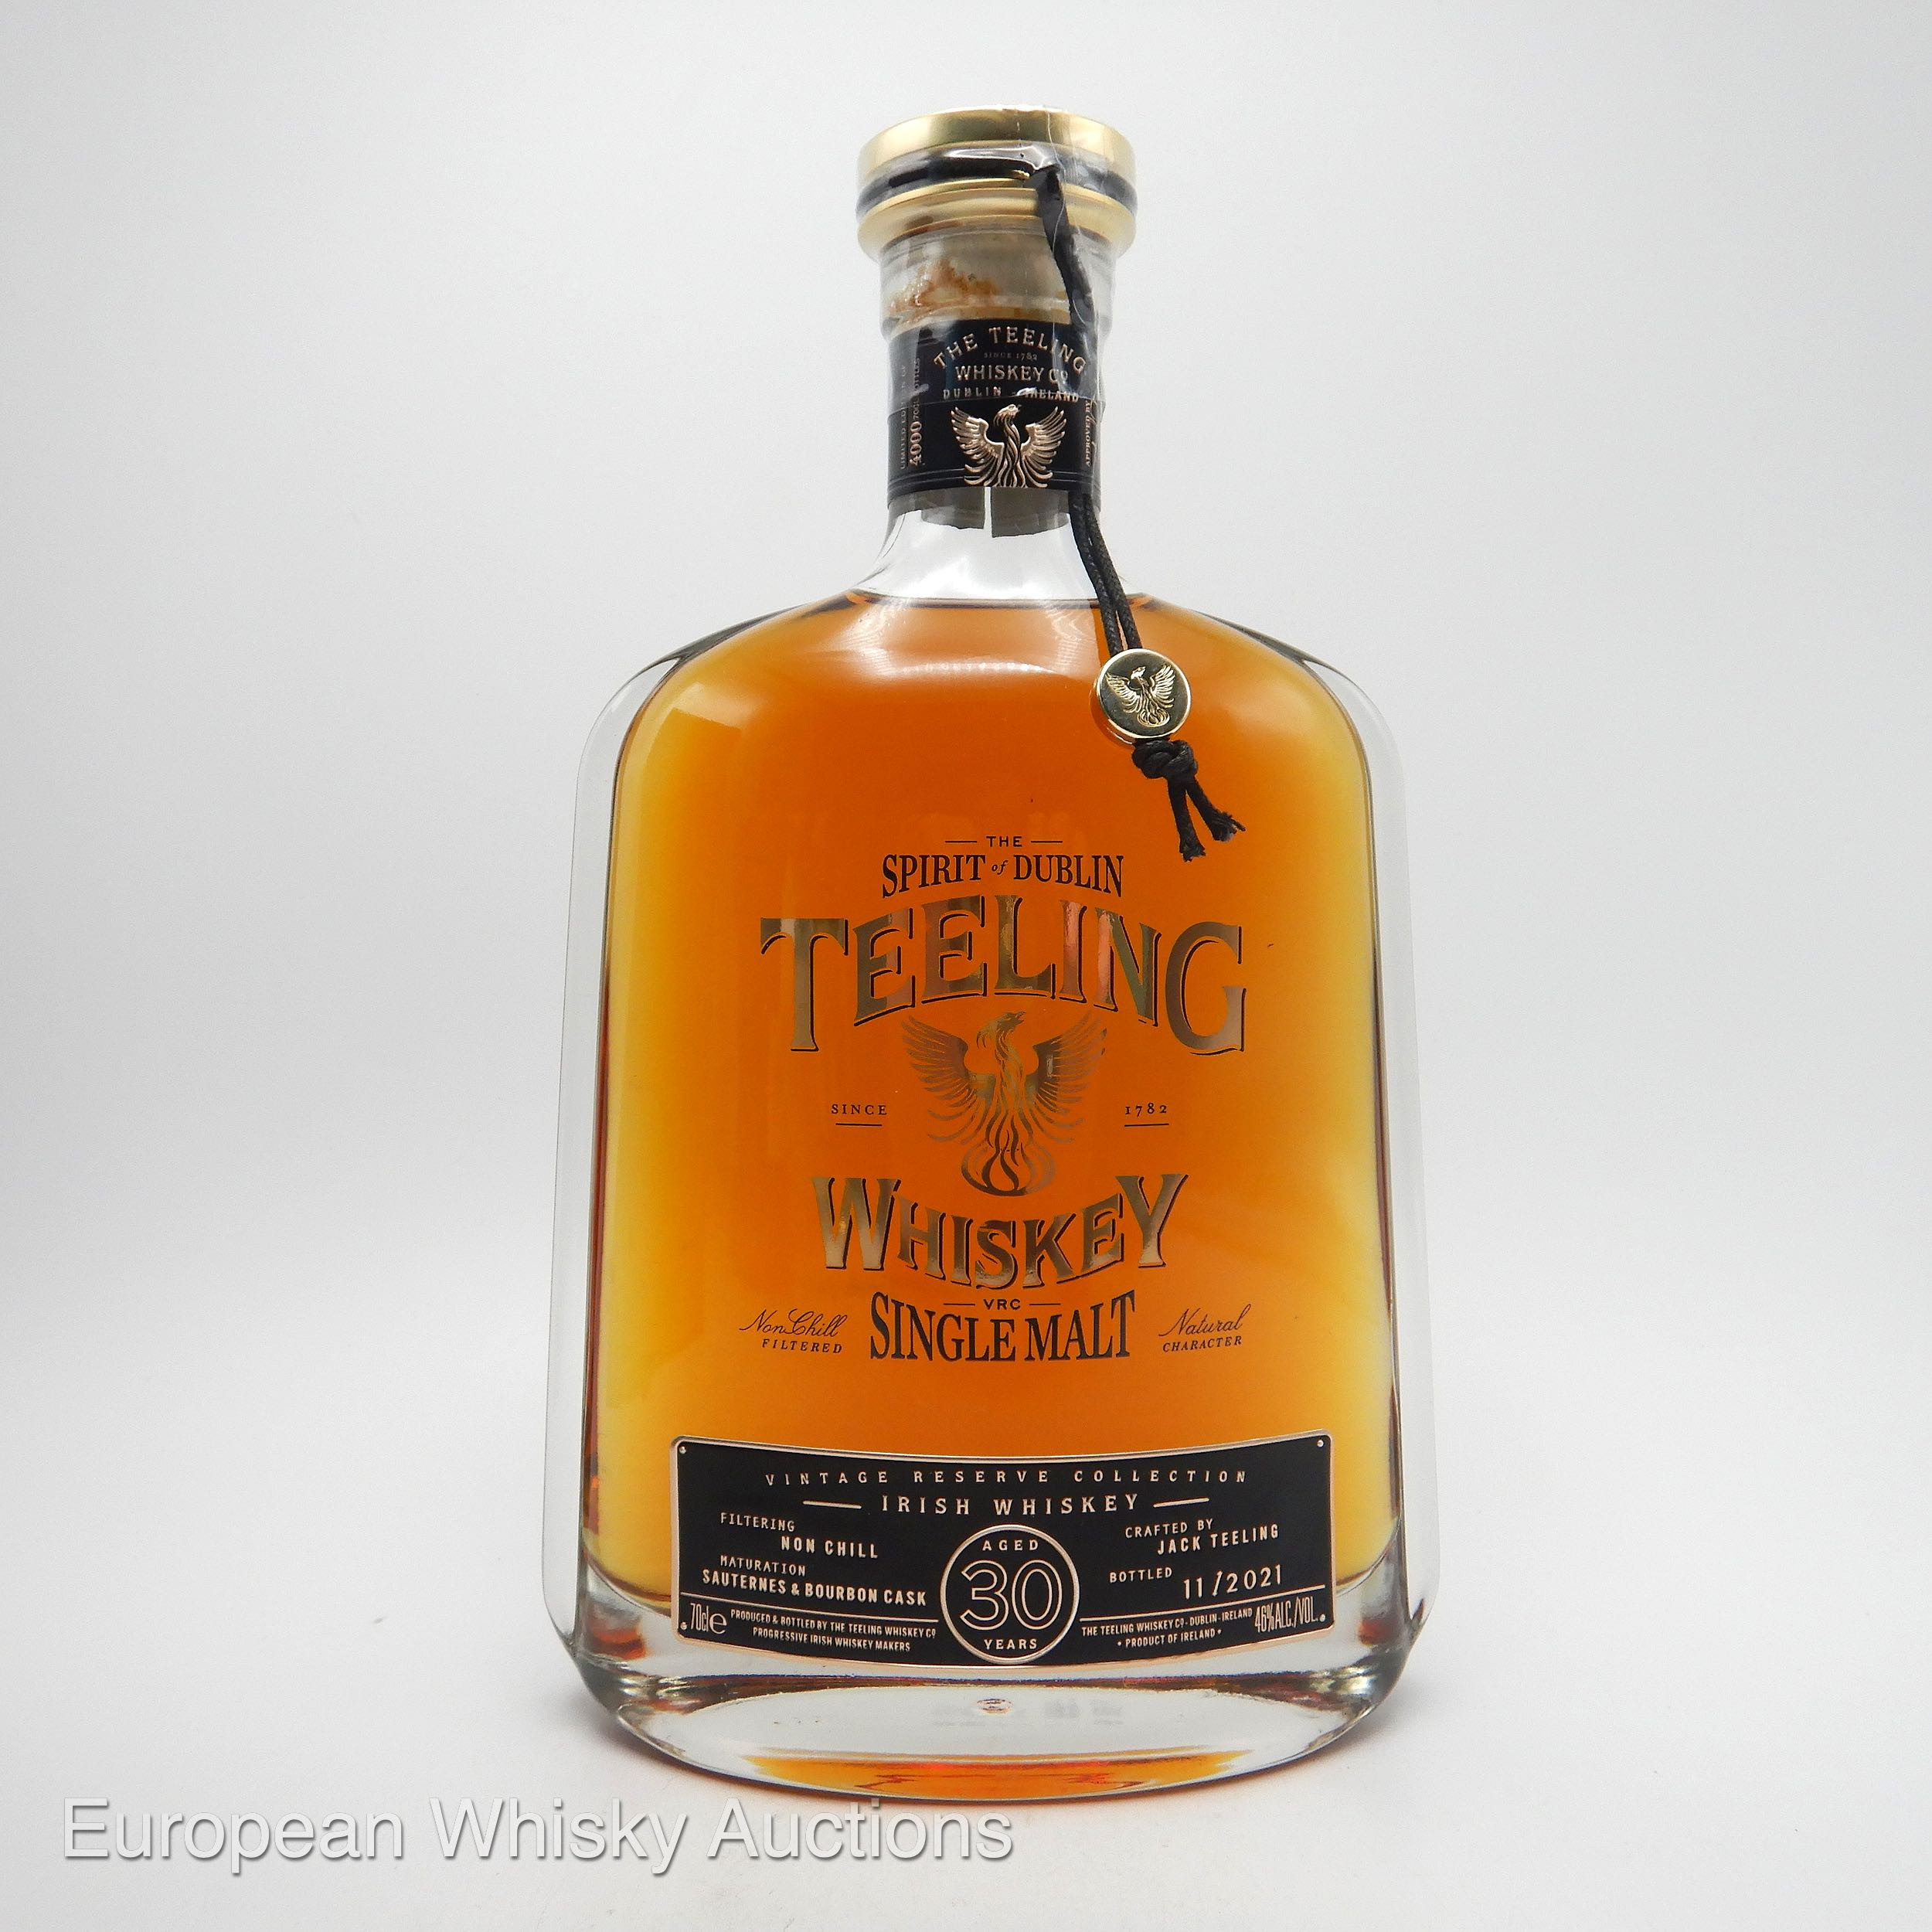 The Teeling Whiskey Co. Vintage Reserve Collection 30 Year Old